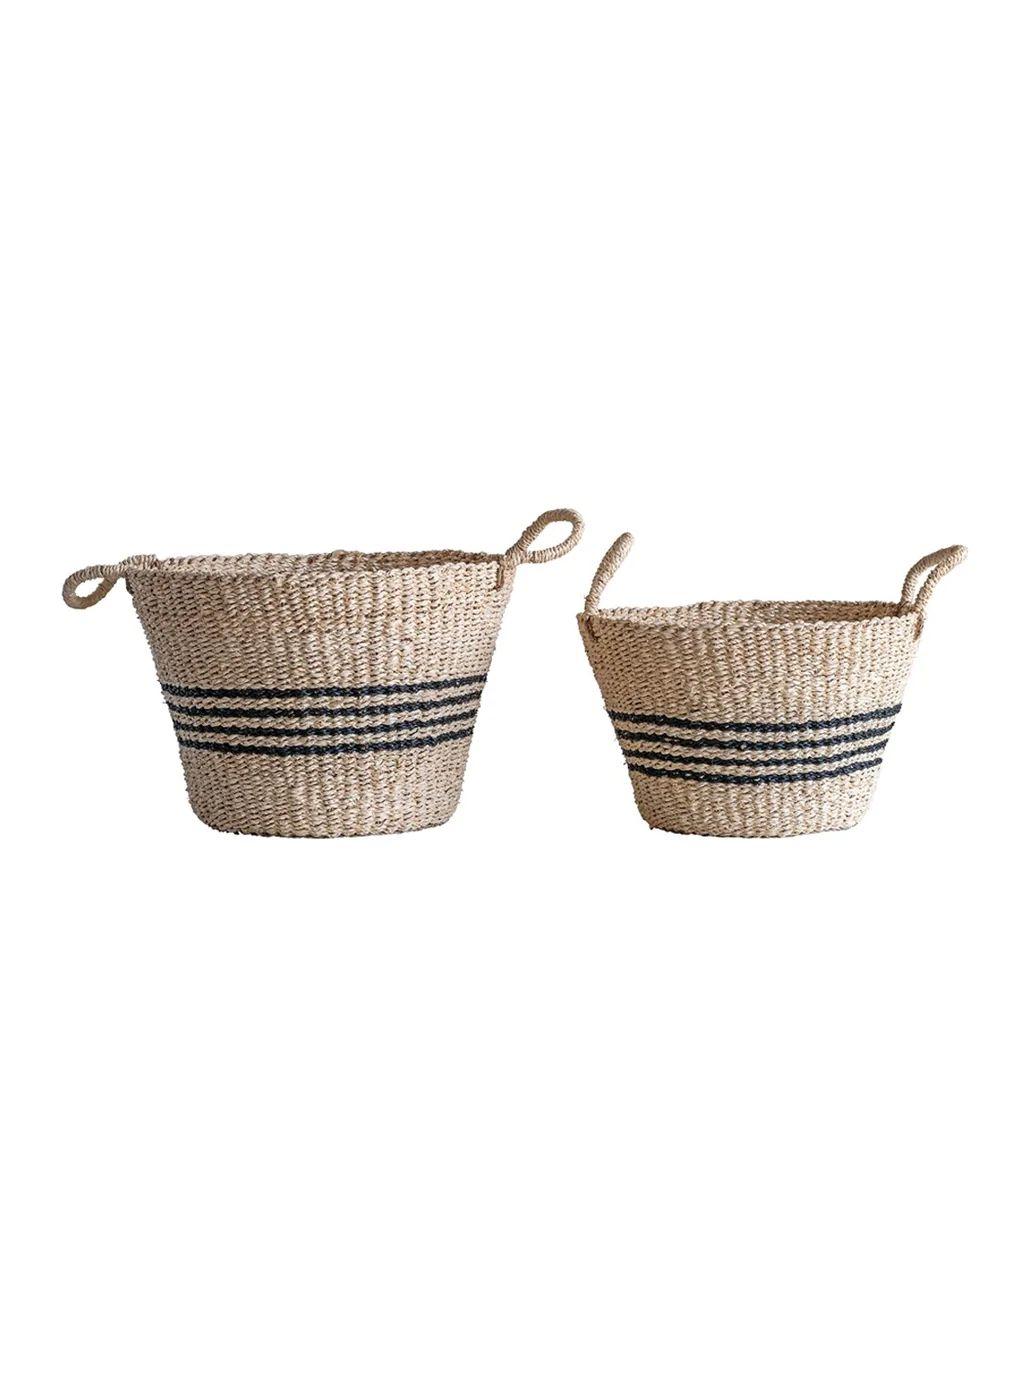 Striped Seagrass Baskets, Set of 2 | House of Jade Home